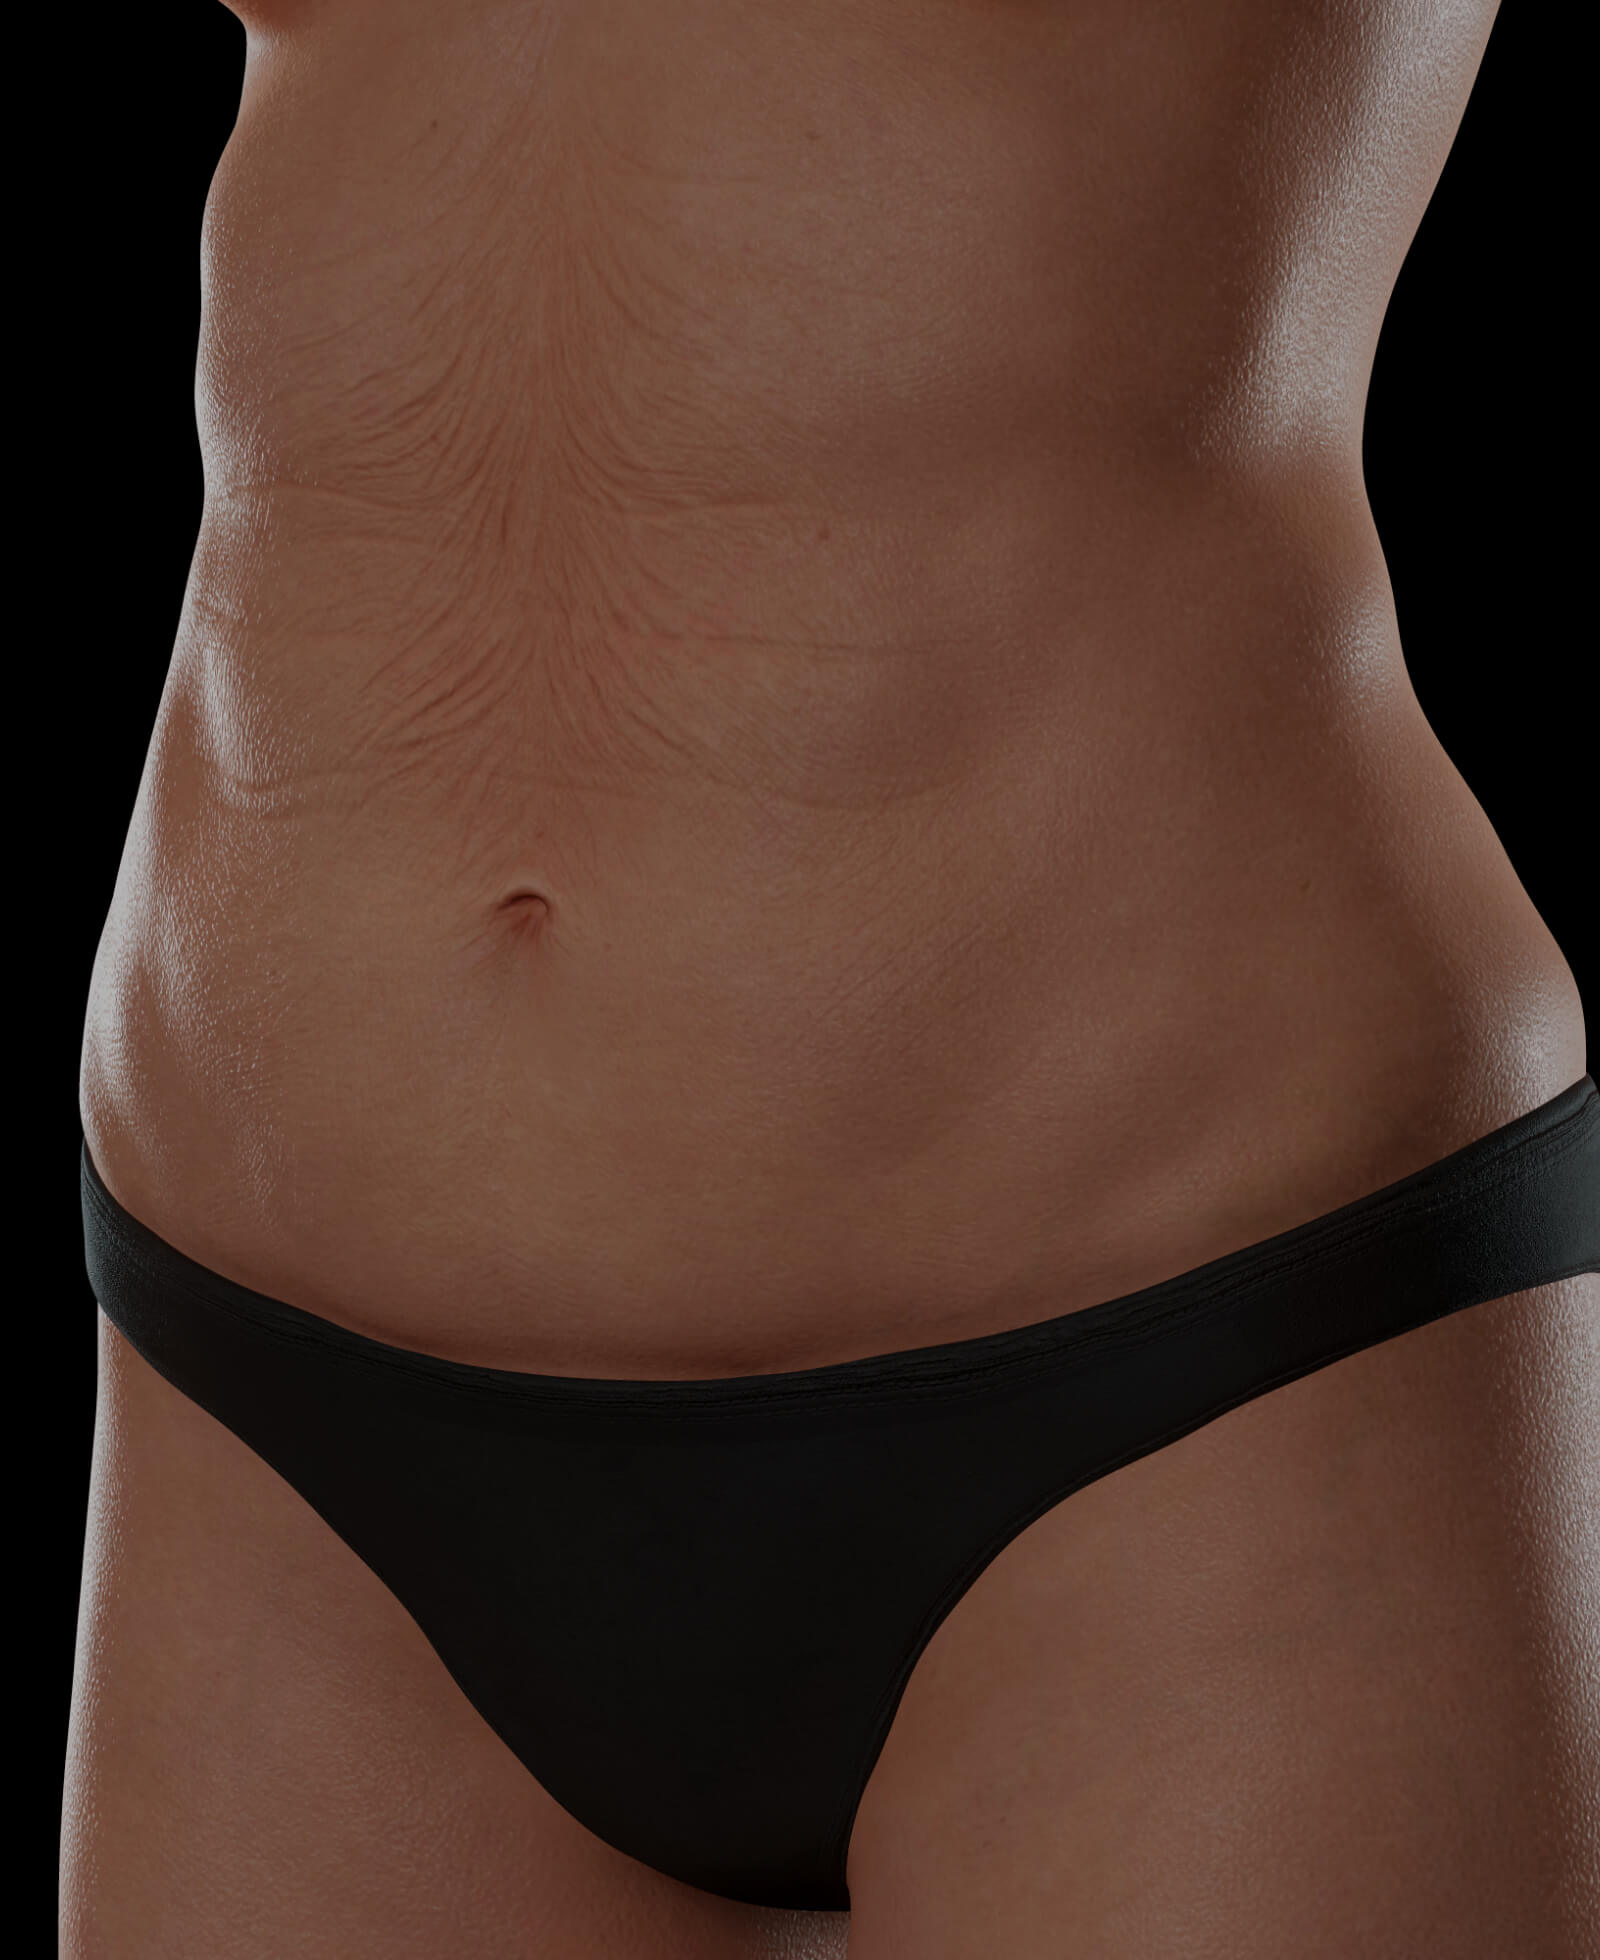 Female patient at Clinique Chloé with body skin laxity looking for body skin tightening